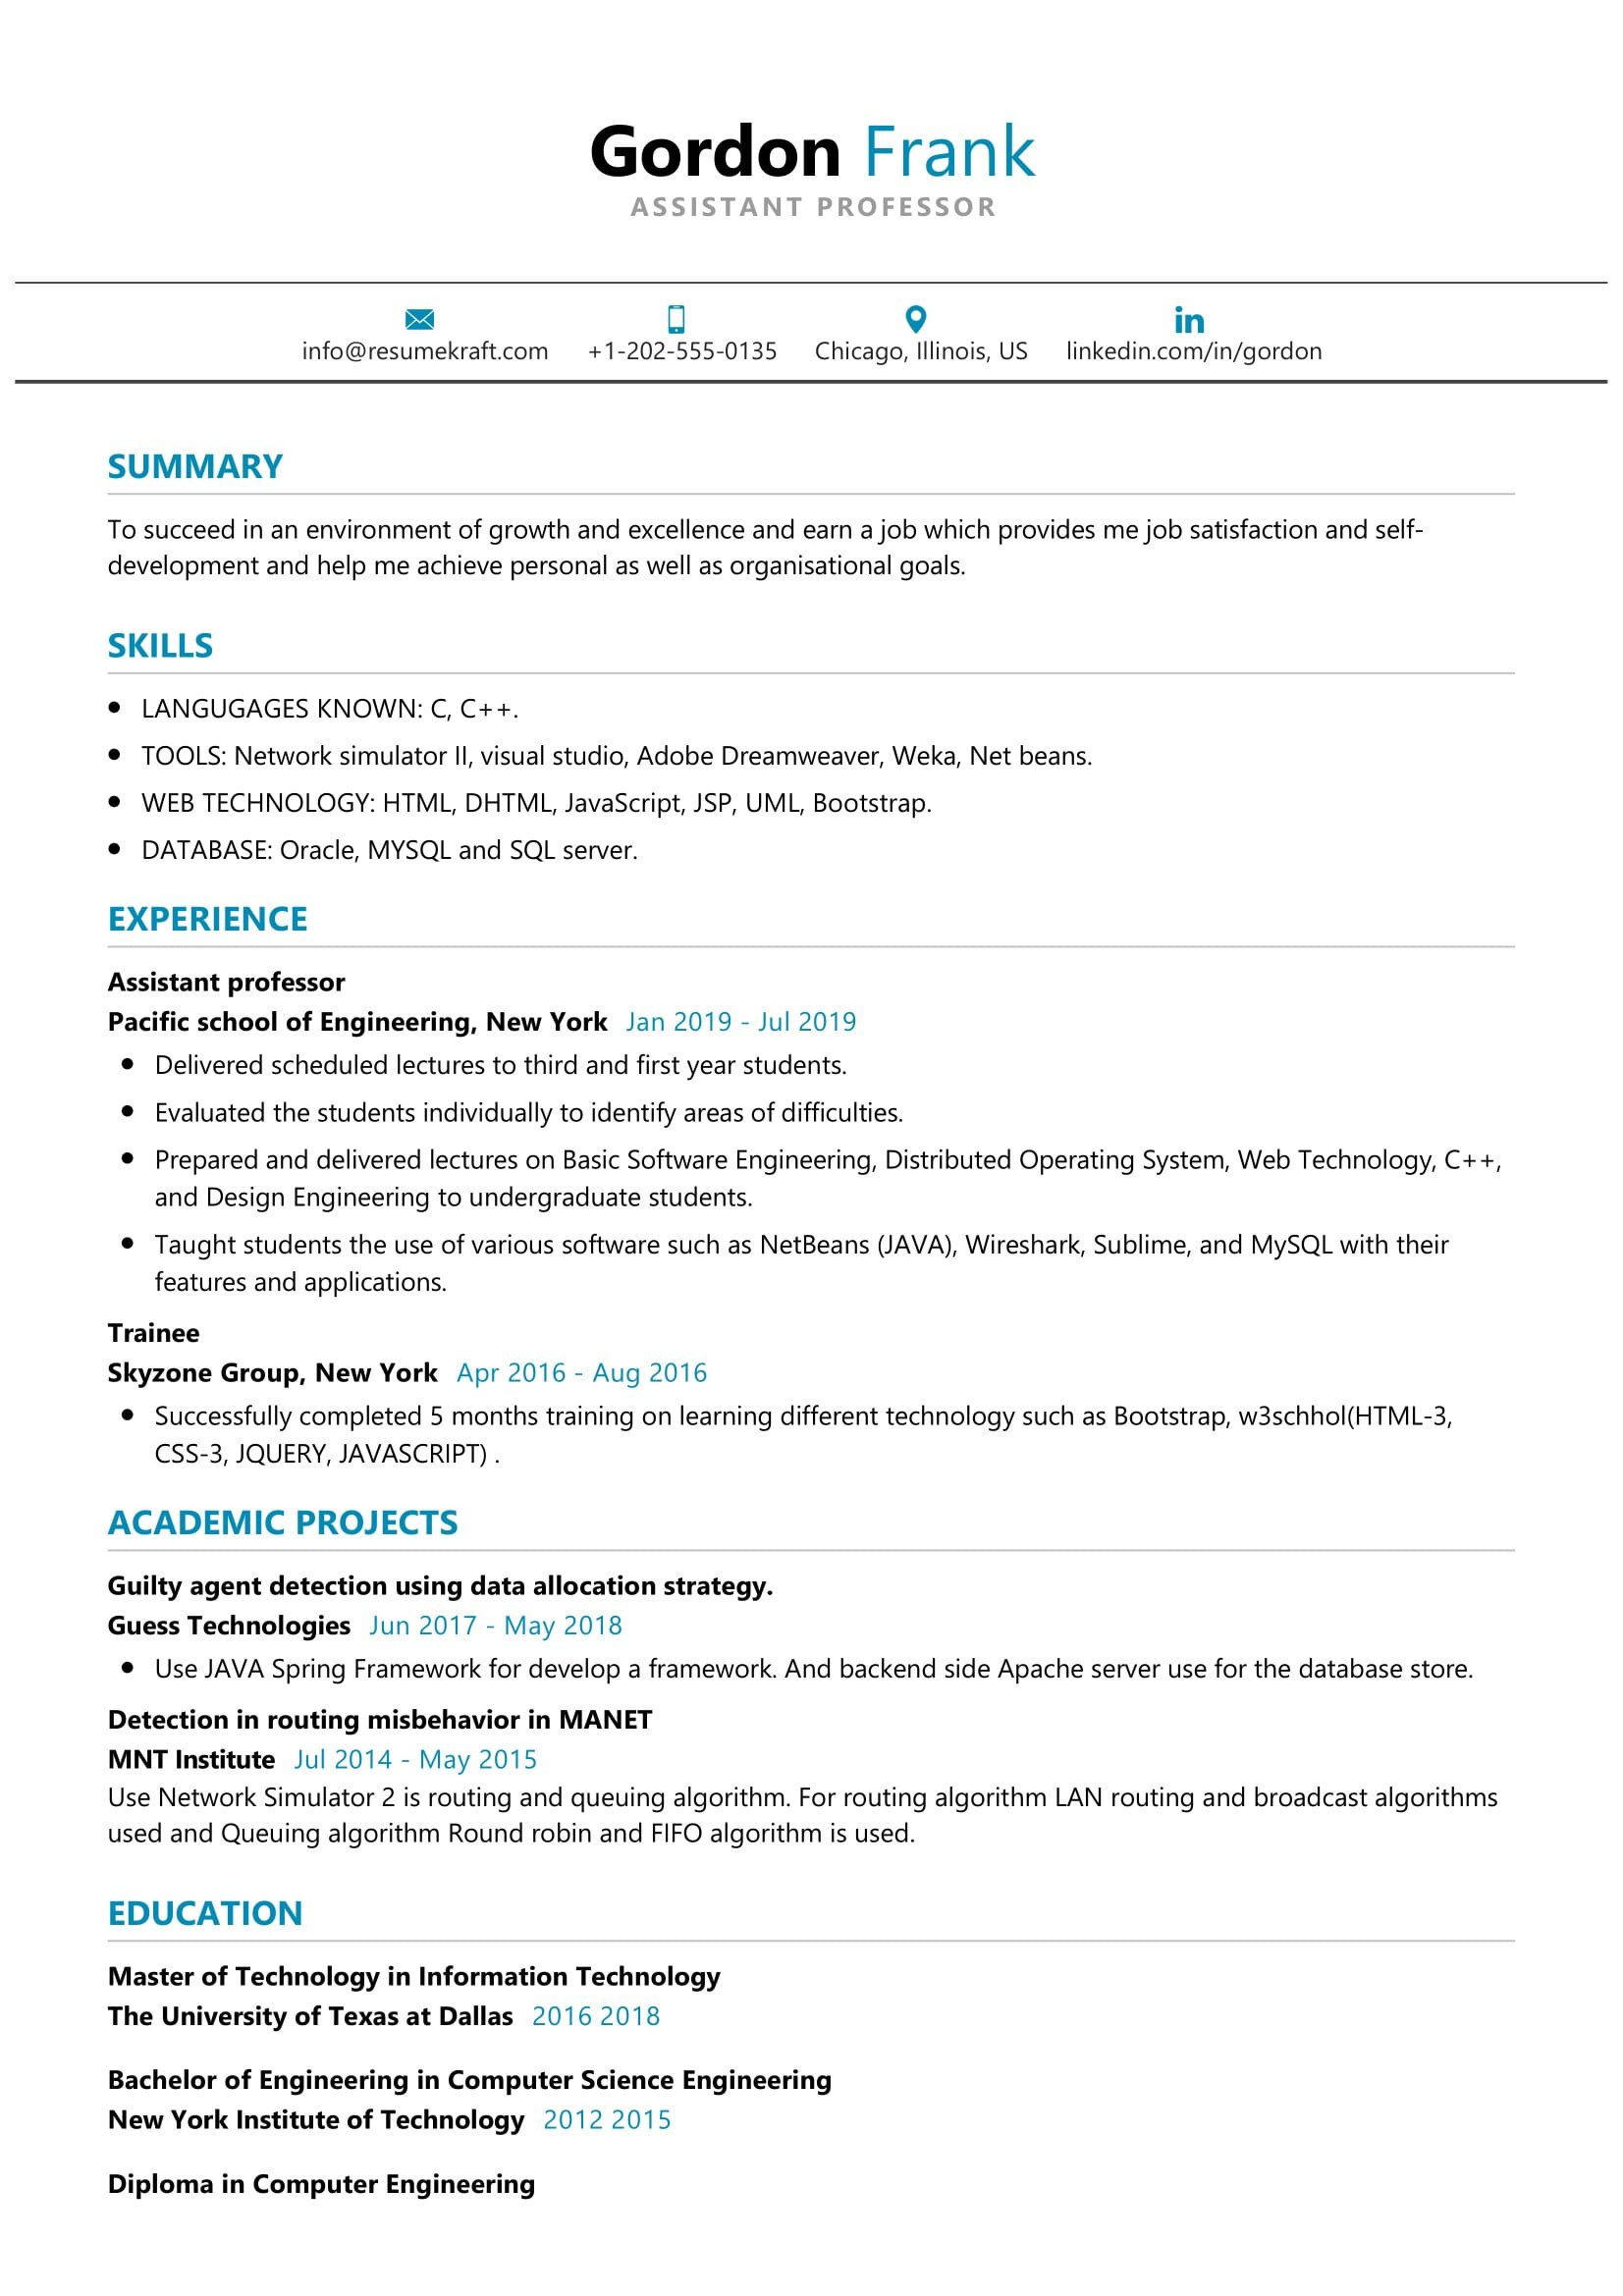 Emerging Student and assistant Professor and Resume Sample assistant Professor Resume Sample 2022 Writing Tips – Resumekraft